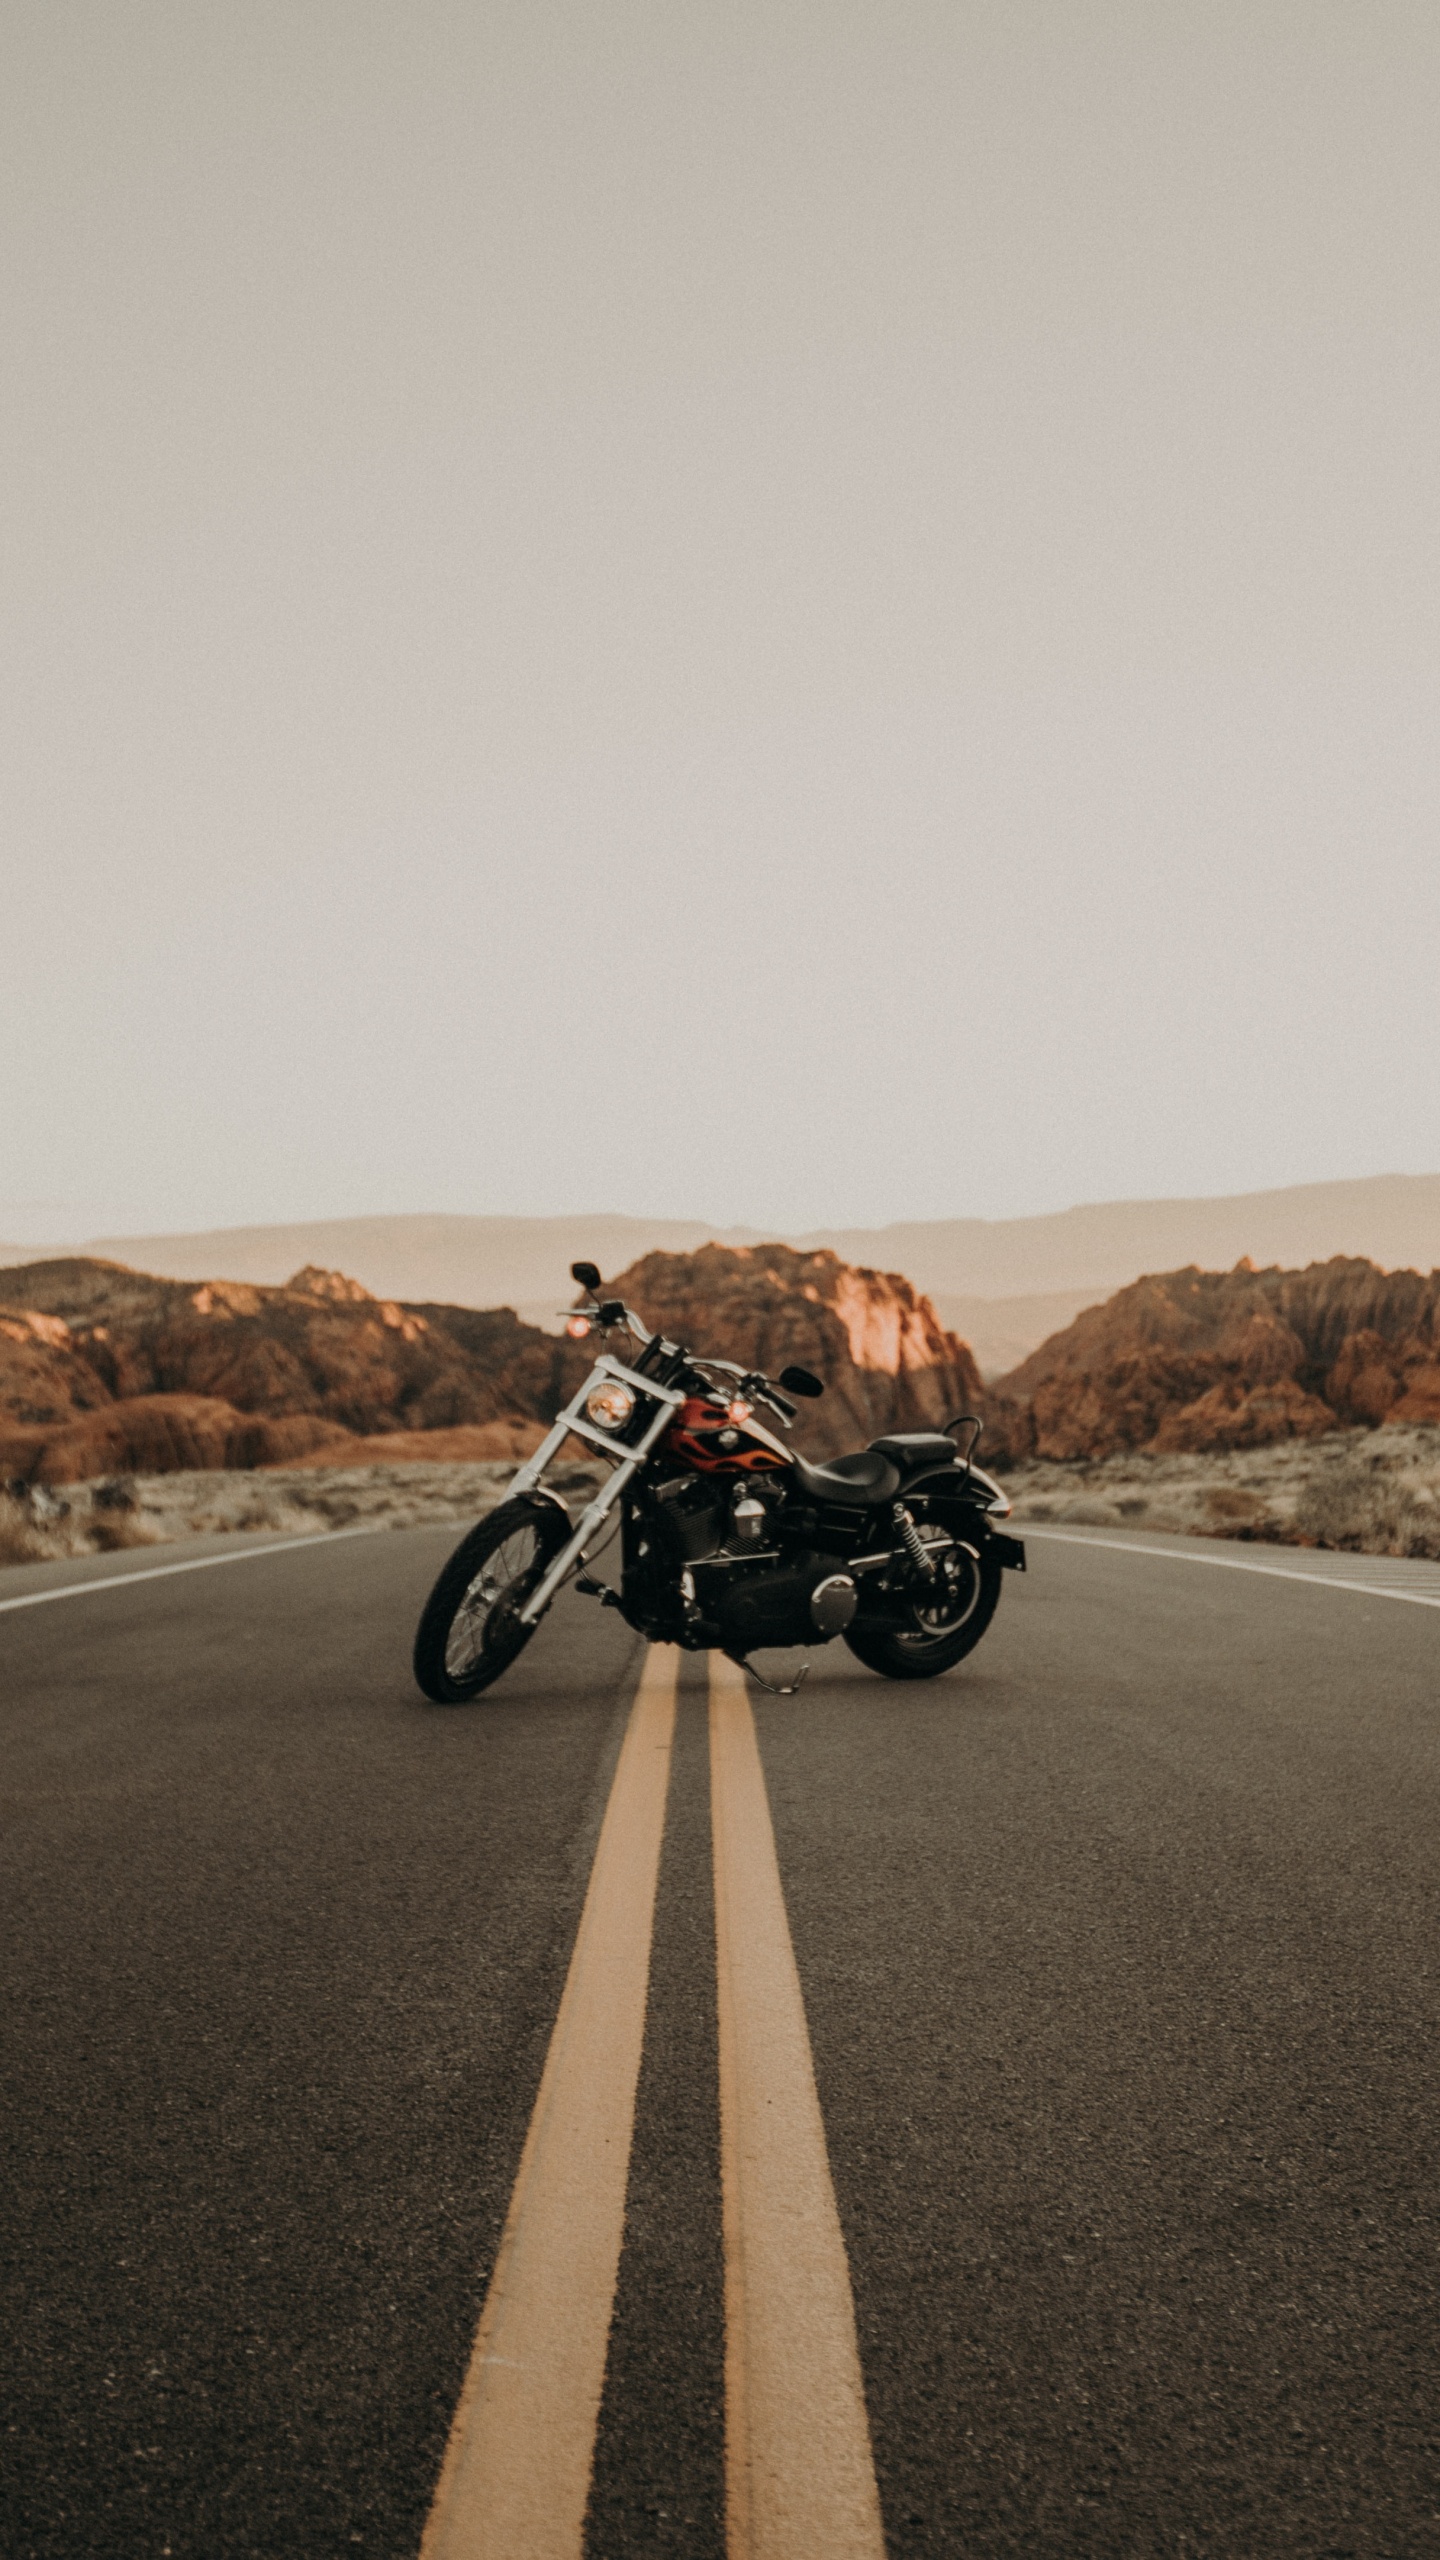 Black and White Motorcycle on Road During Daytime. Wallpaper in 1440x2560 Resolution